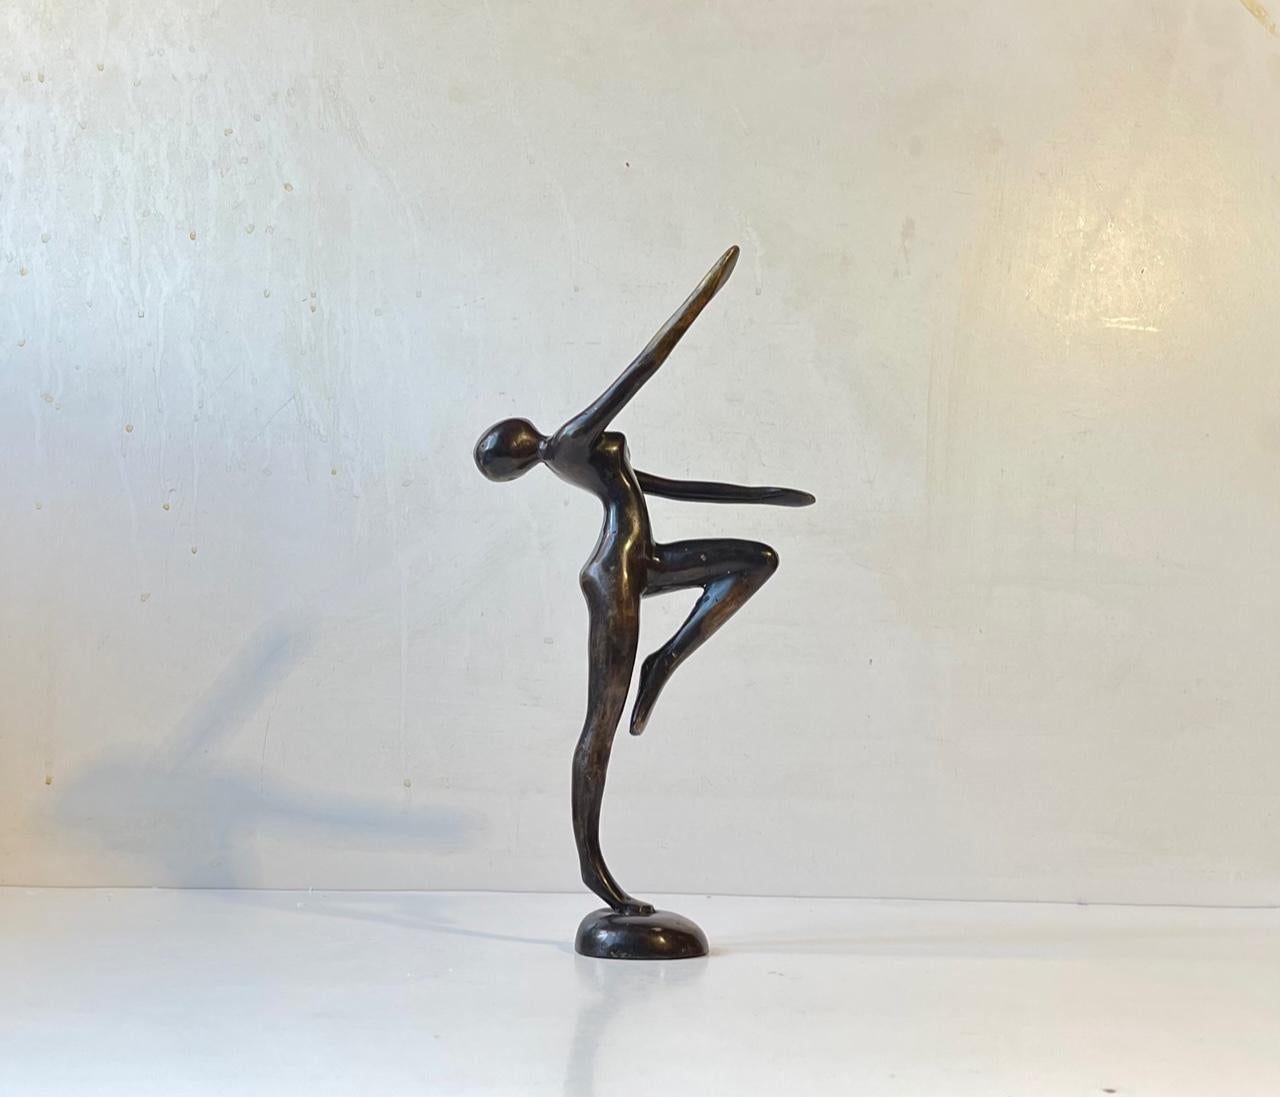 Unusual androgynous sculpture in patinated bronze. Female body and expression-blank facial features. Unknown Scandinavian maker circa 1970. No markings/signature. Measurements: H: 29 cm, W: 15 cm, D: 6 cm.